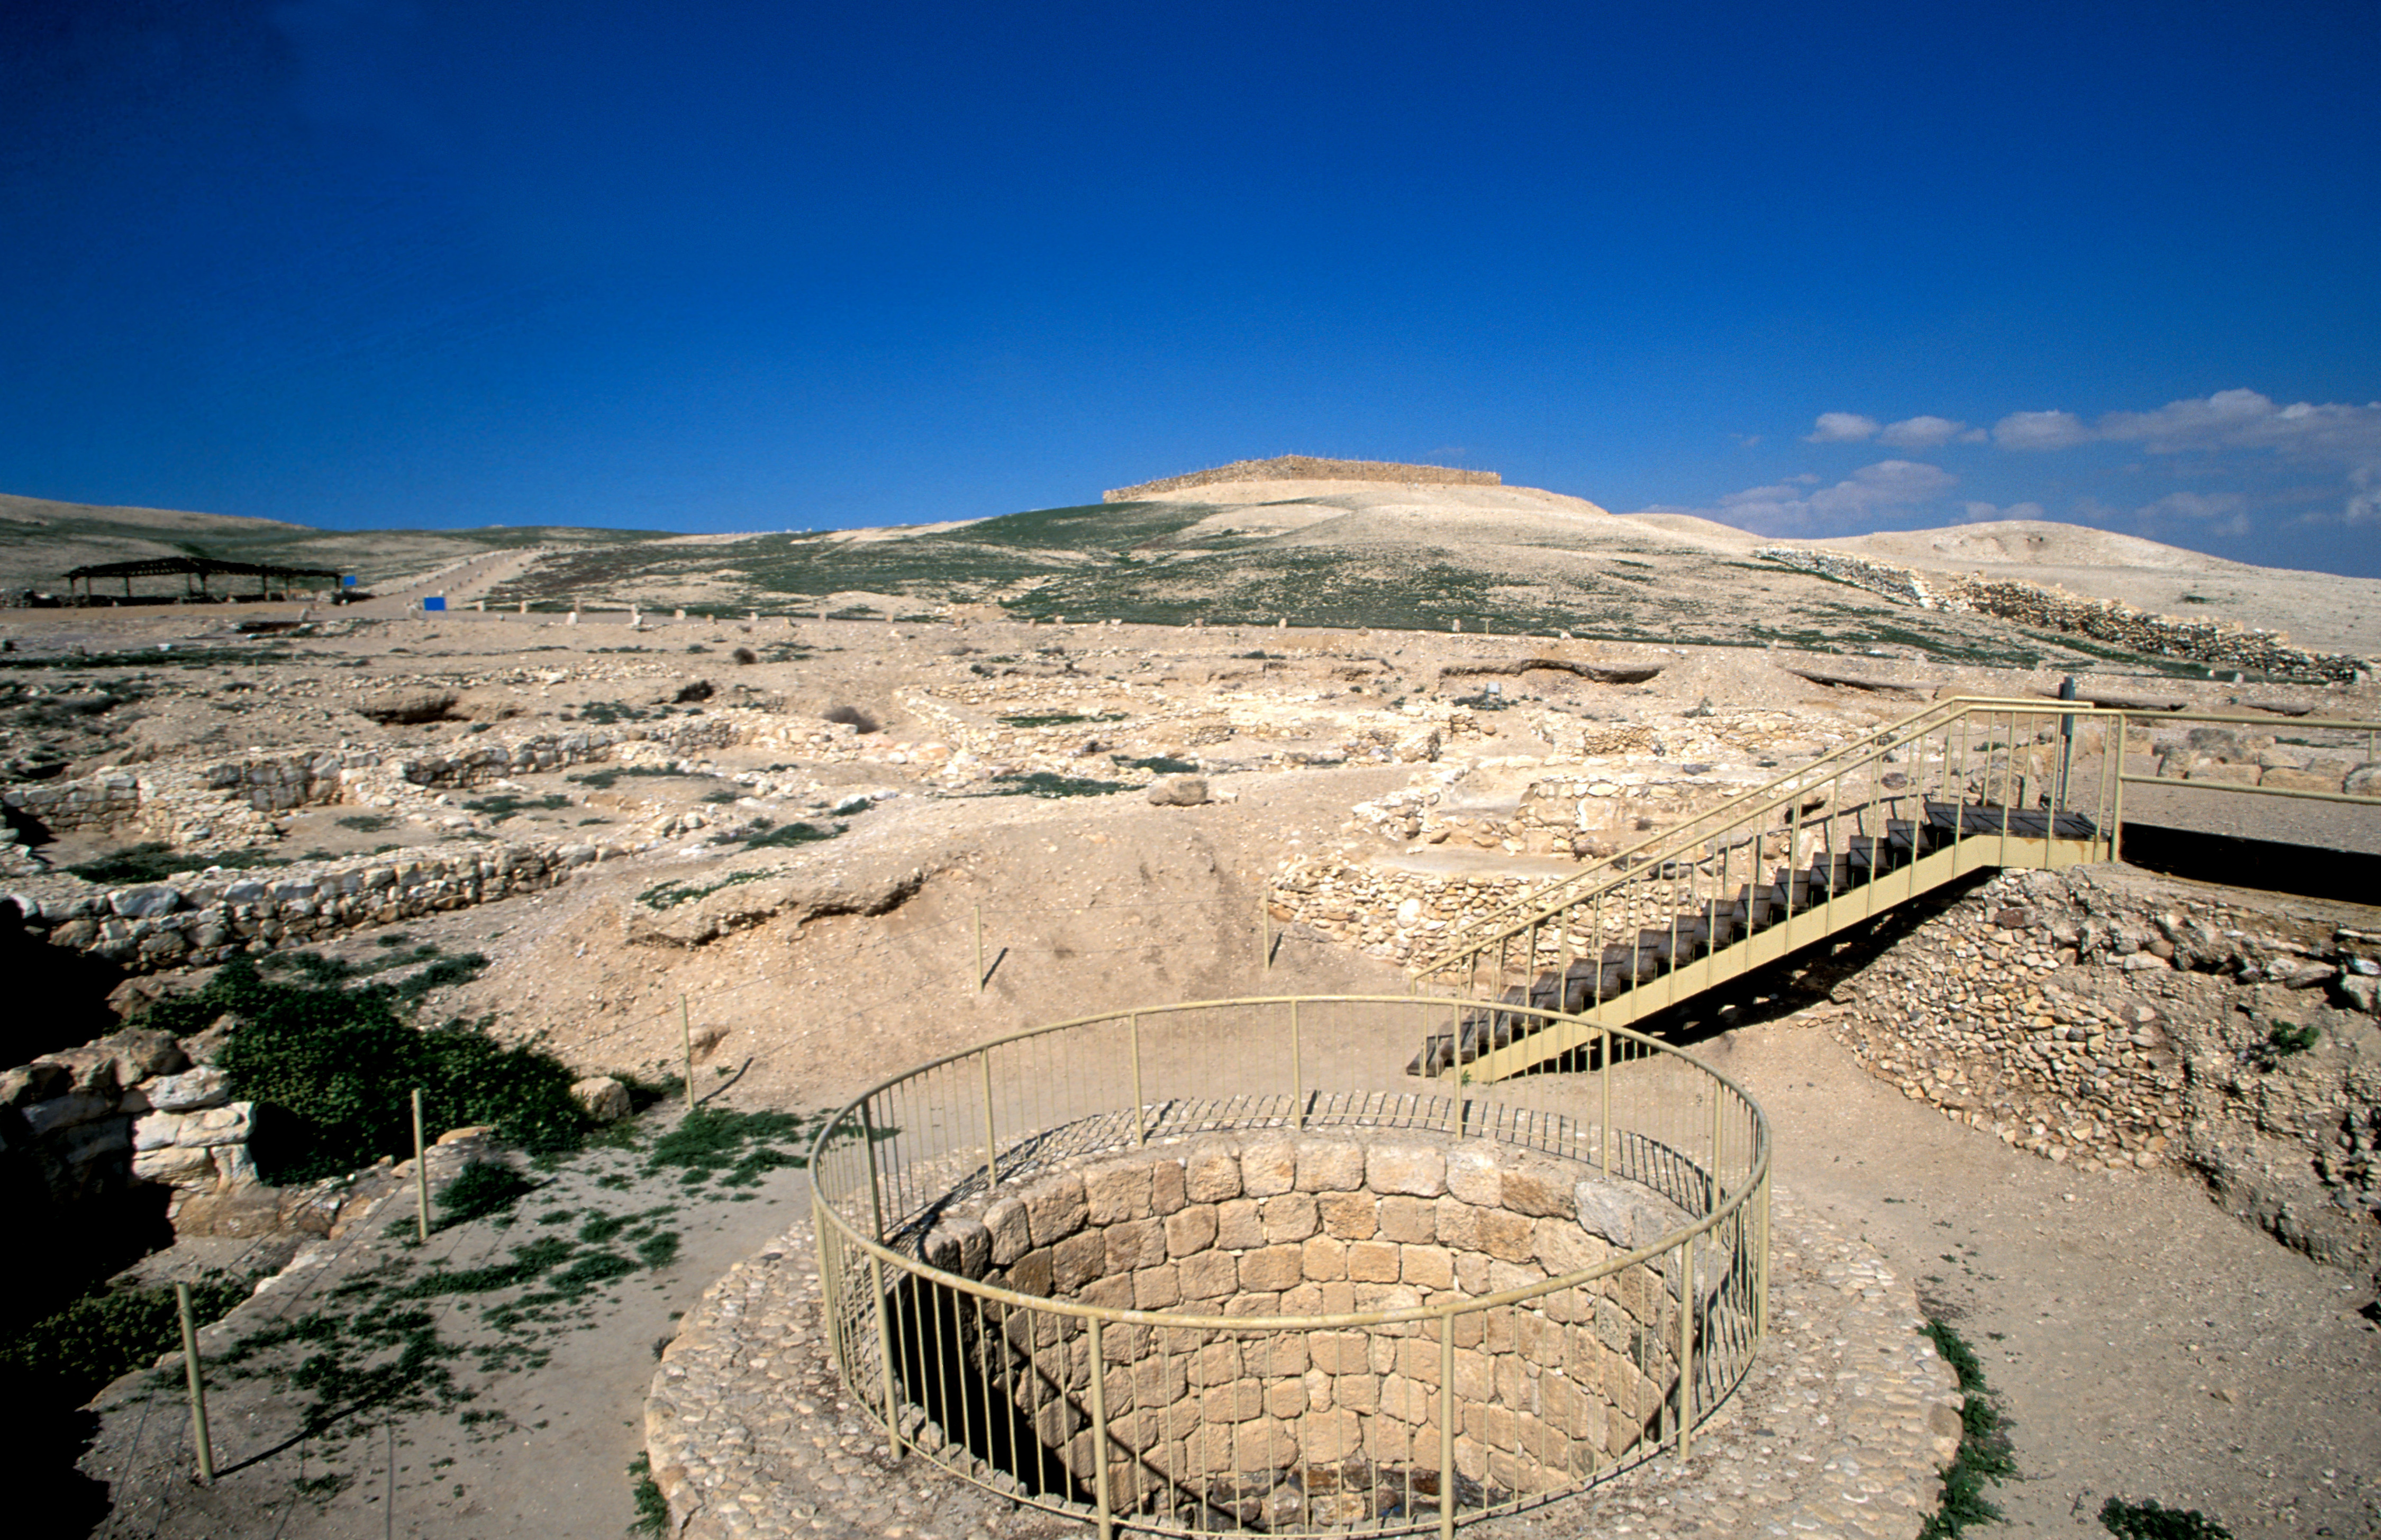 Israel_Tel_Arad._The_water_well_at_the_center_of_the_Canaanite_water_reservoir.jpg